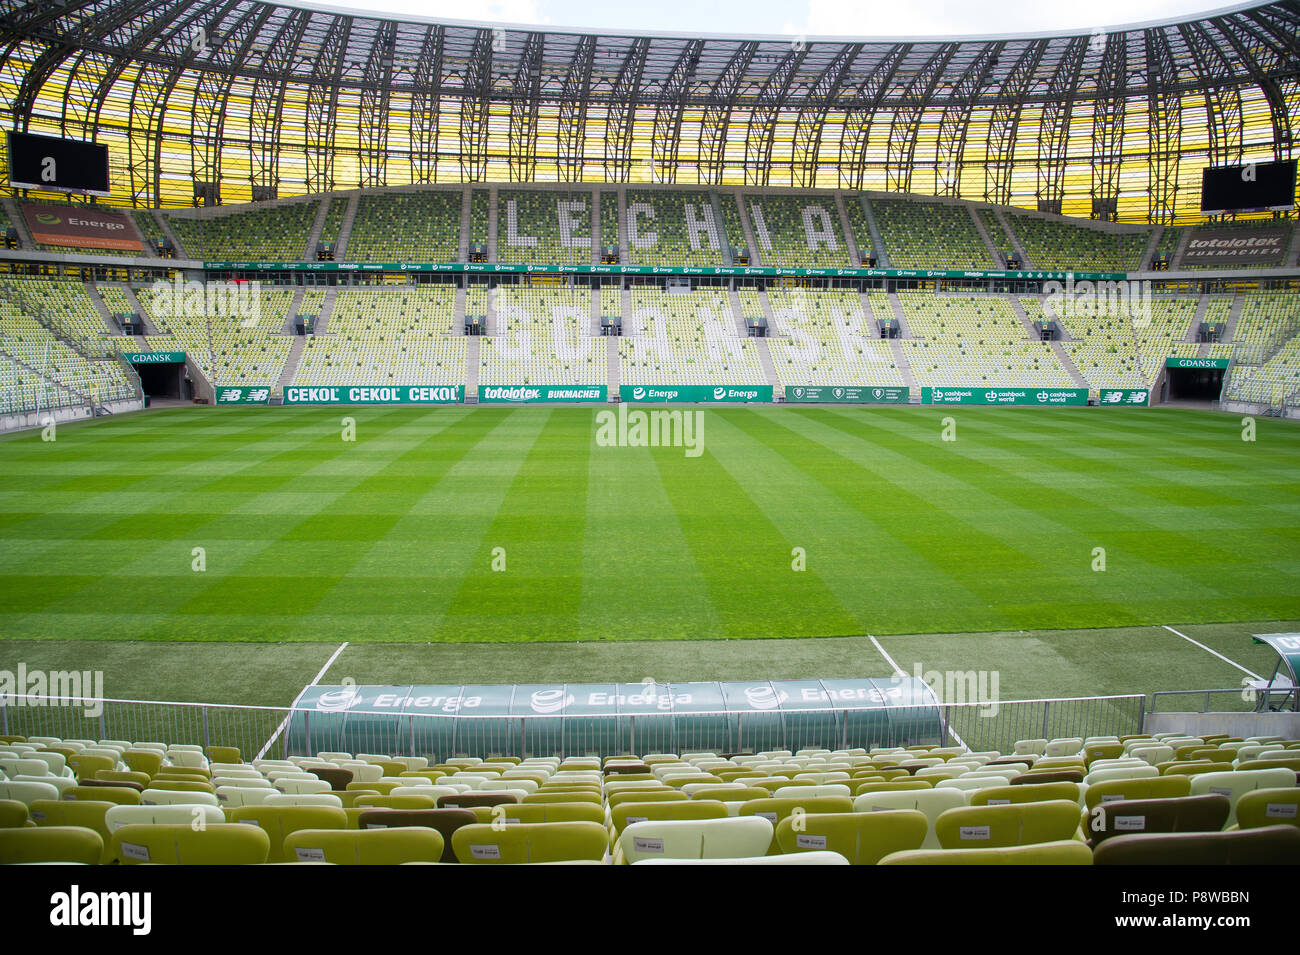 Lechia Gdansk Football High Resolution Stock Photography and Images - Alamy